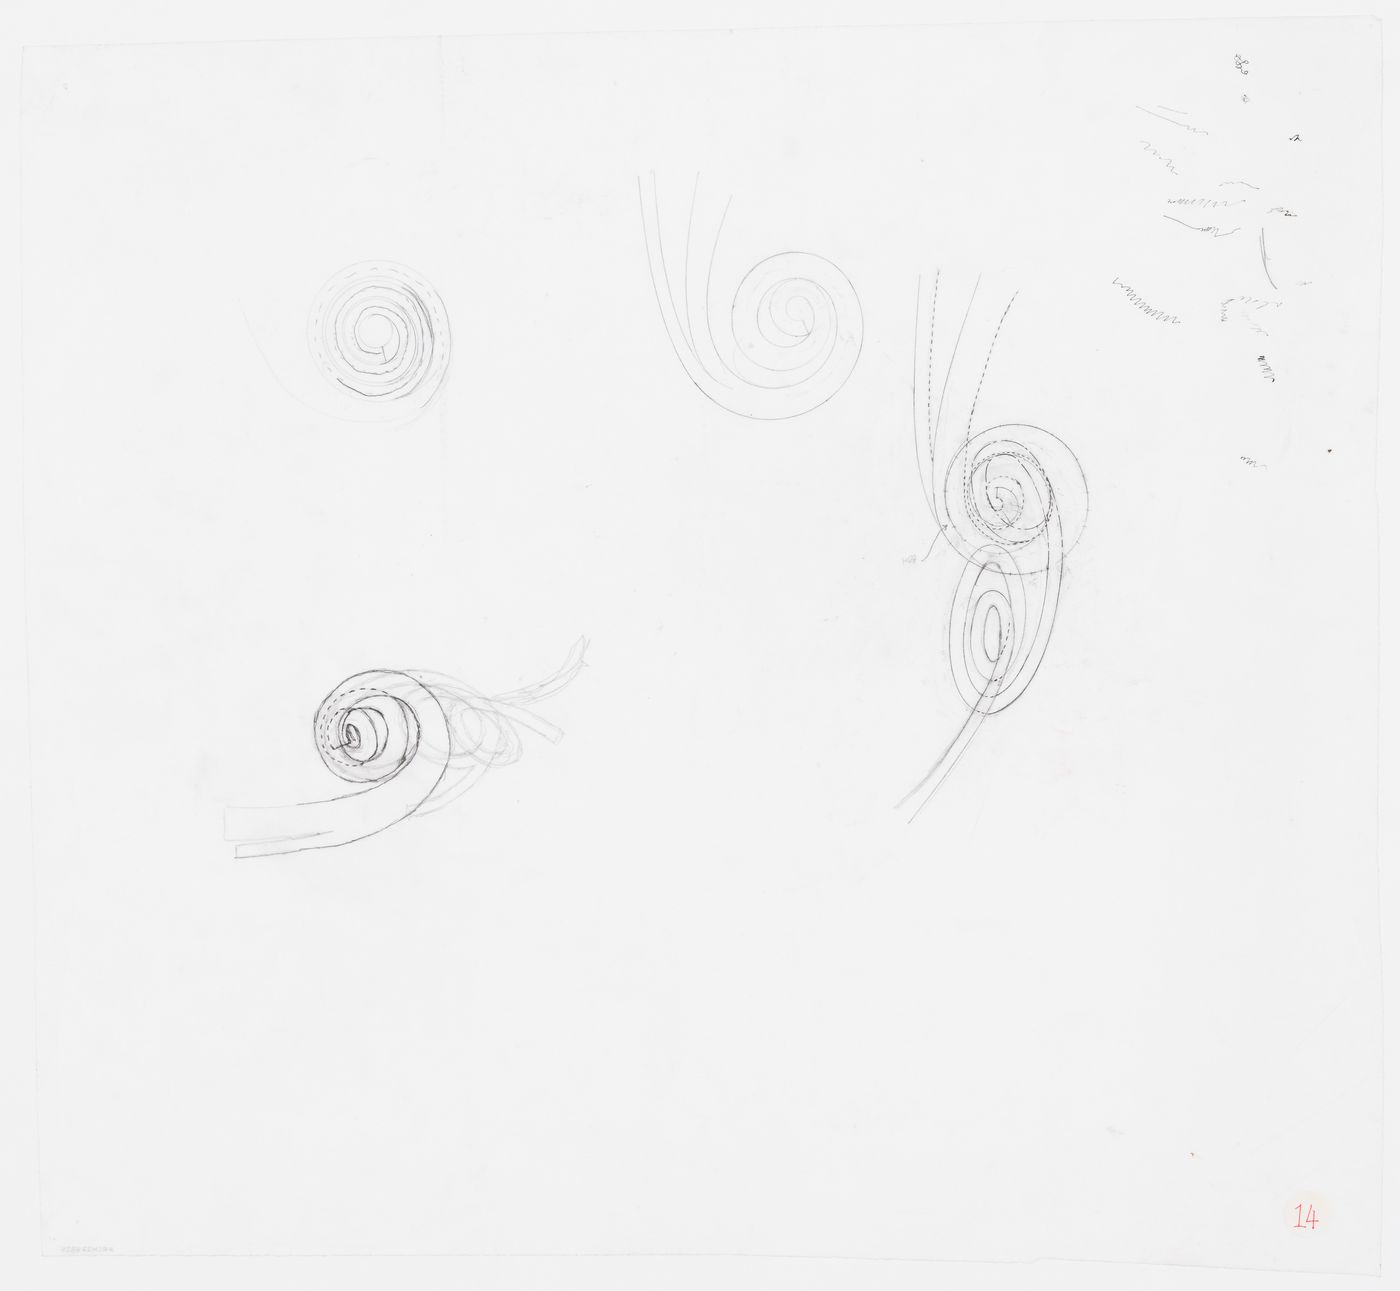 Sketch for circulation in the library store (spiral), Kansai-Kan of the National Diet Library, Seika, Japan